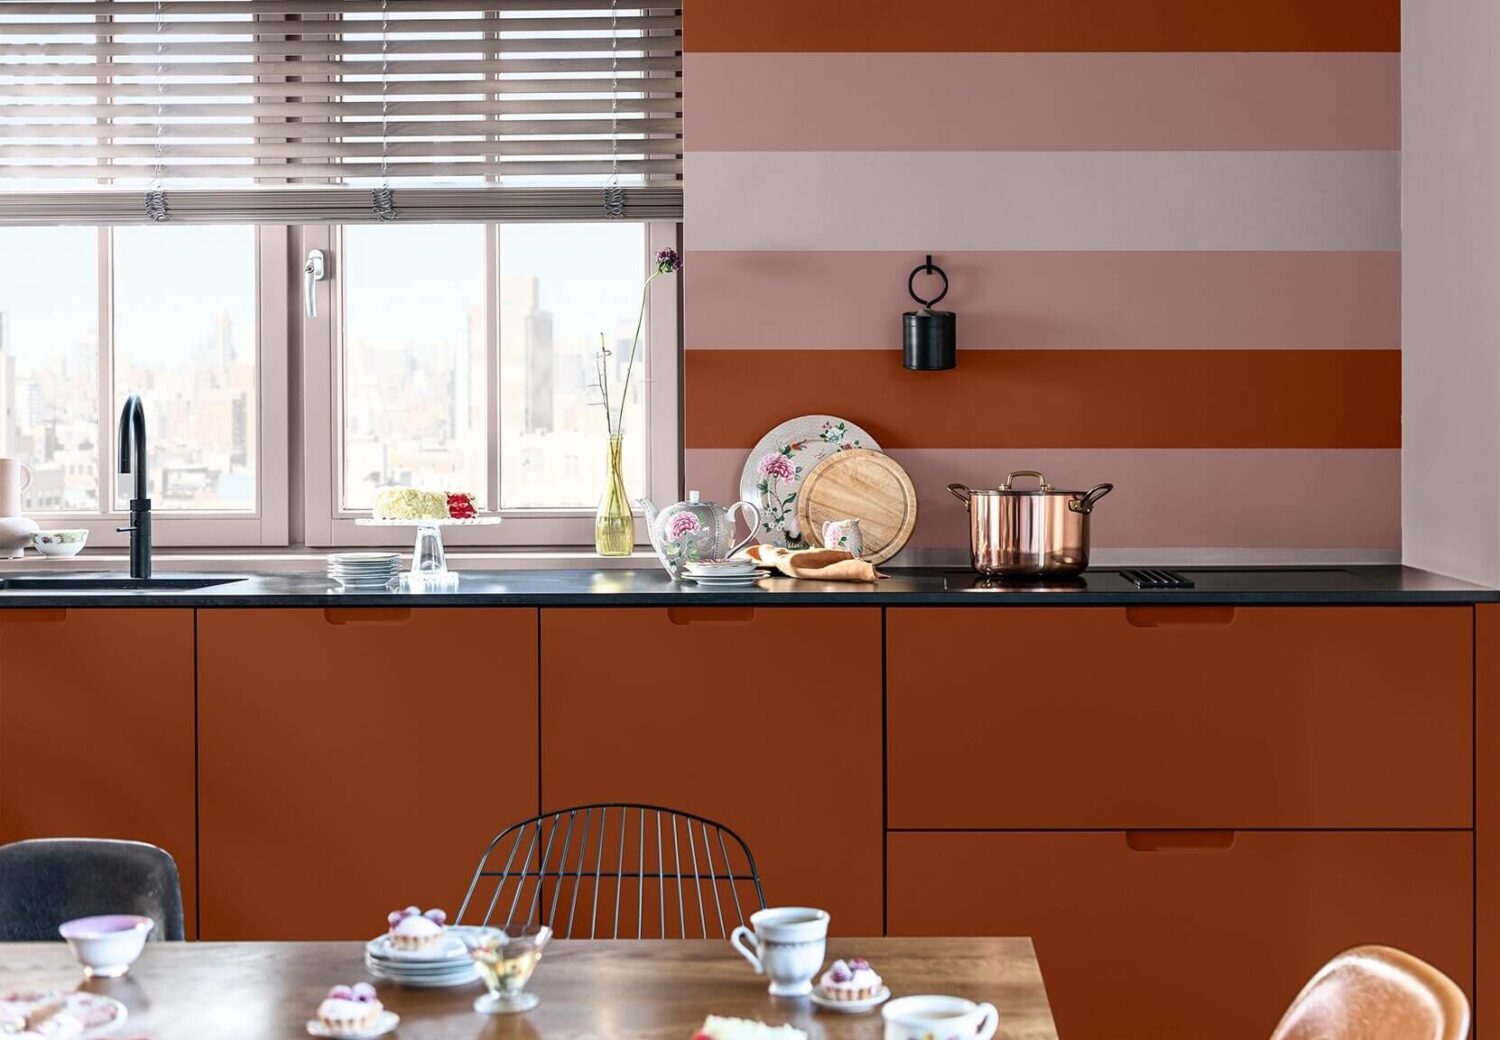 warm-colour-story-kitchen-Inspiration-striped-wall-nordroom